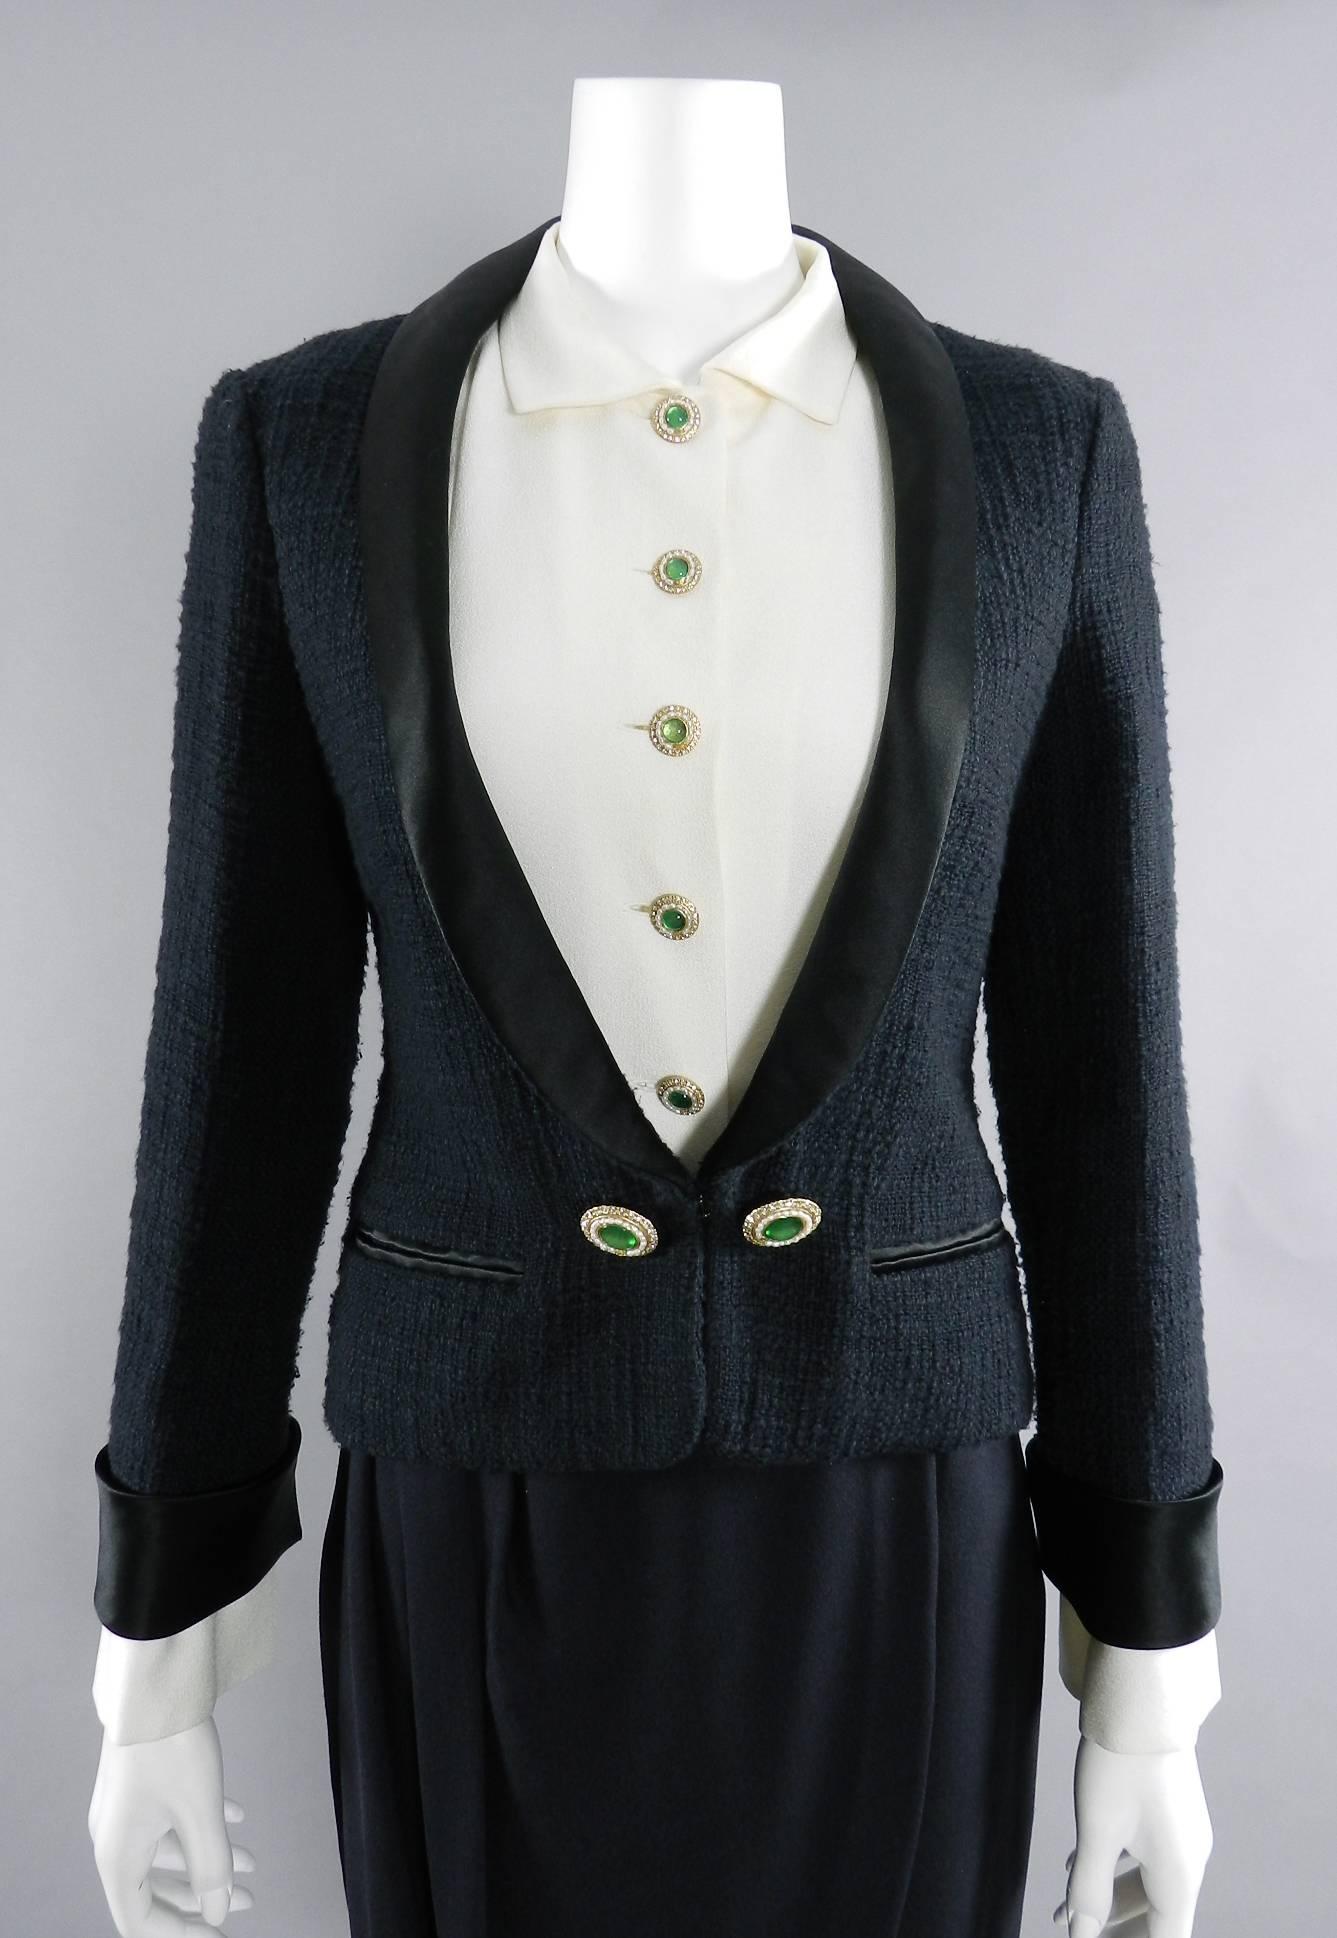 Women's Chanel pre-fall 2012 Bombay Black Suit with Silk Blouse Green Jewelled Buttons